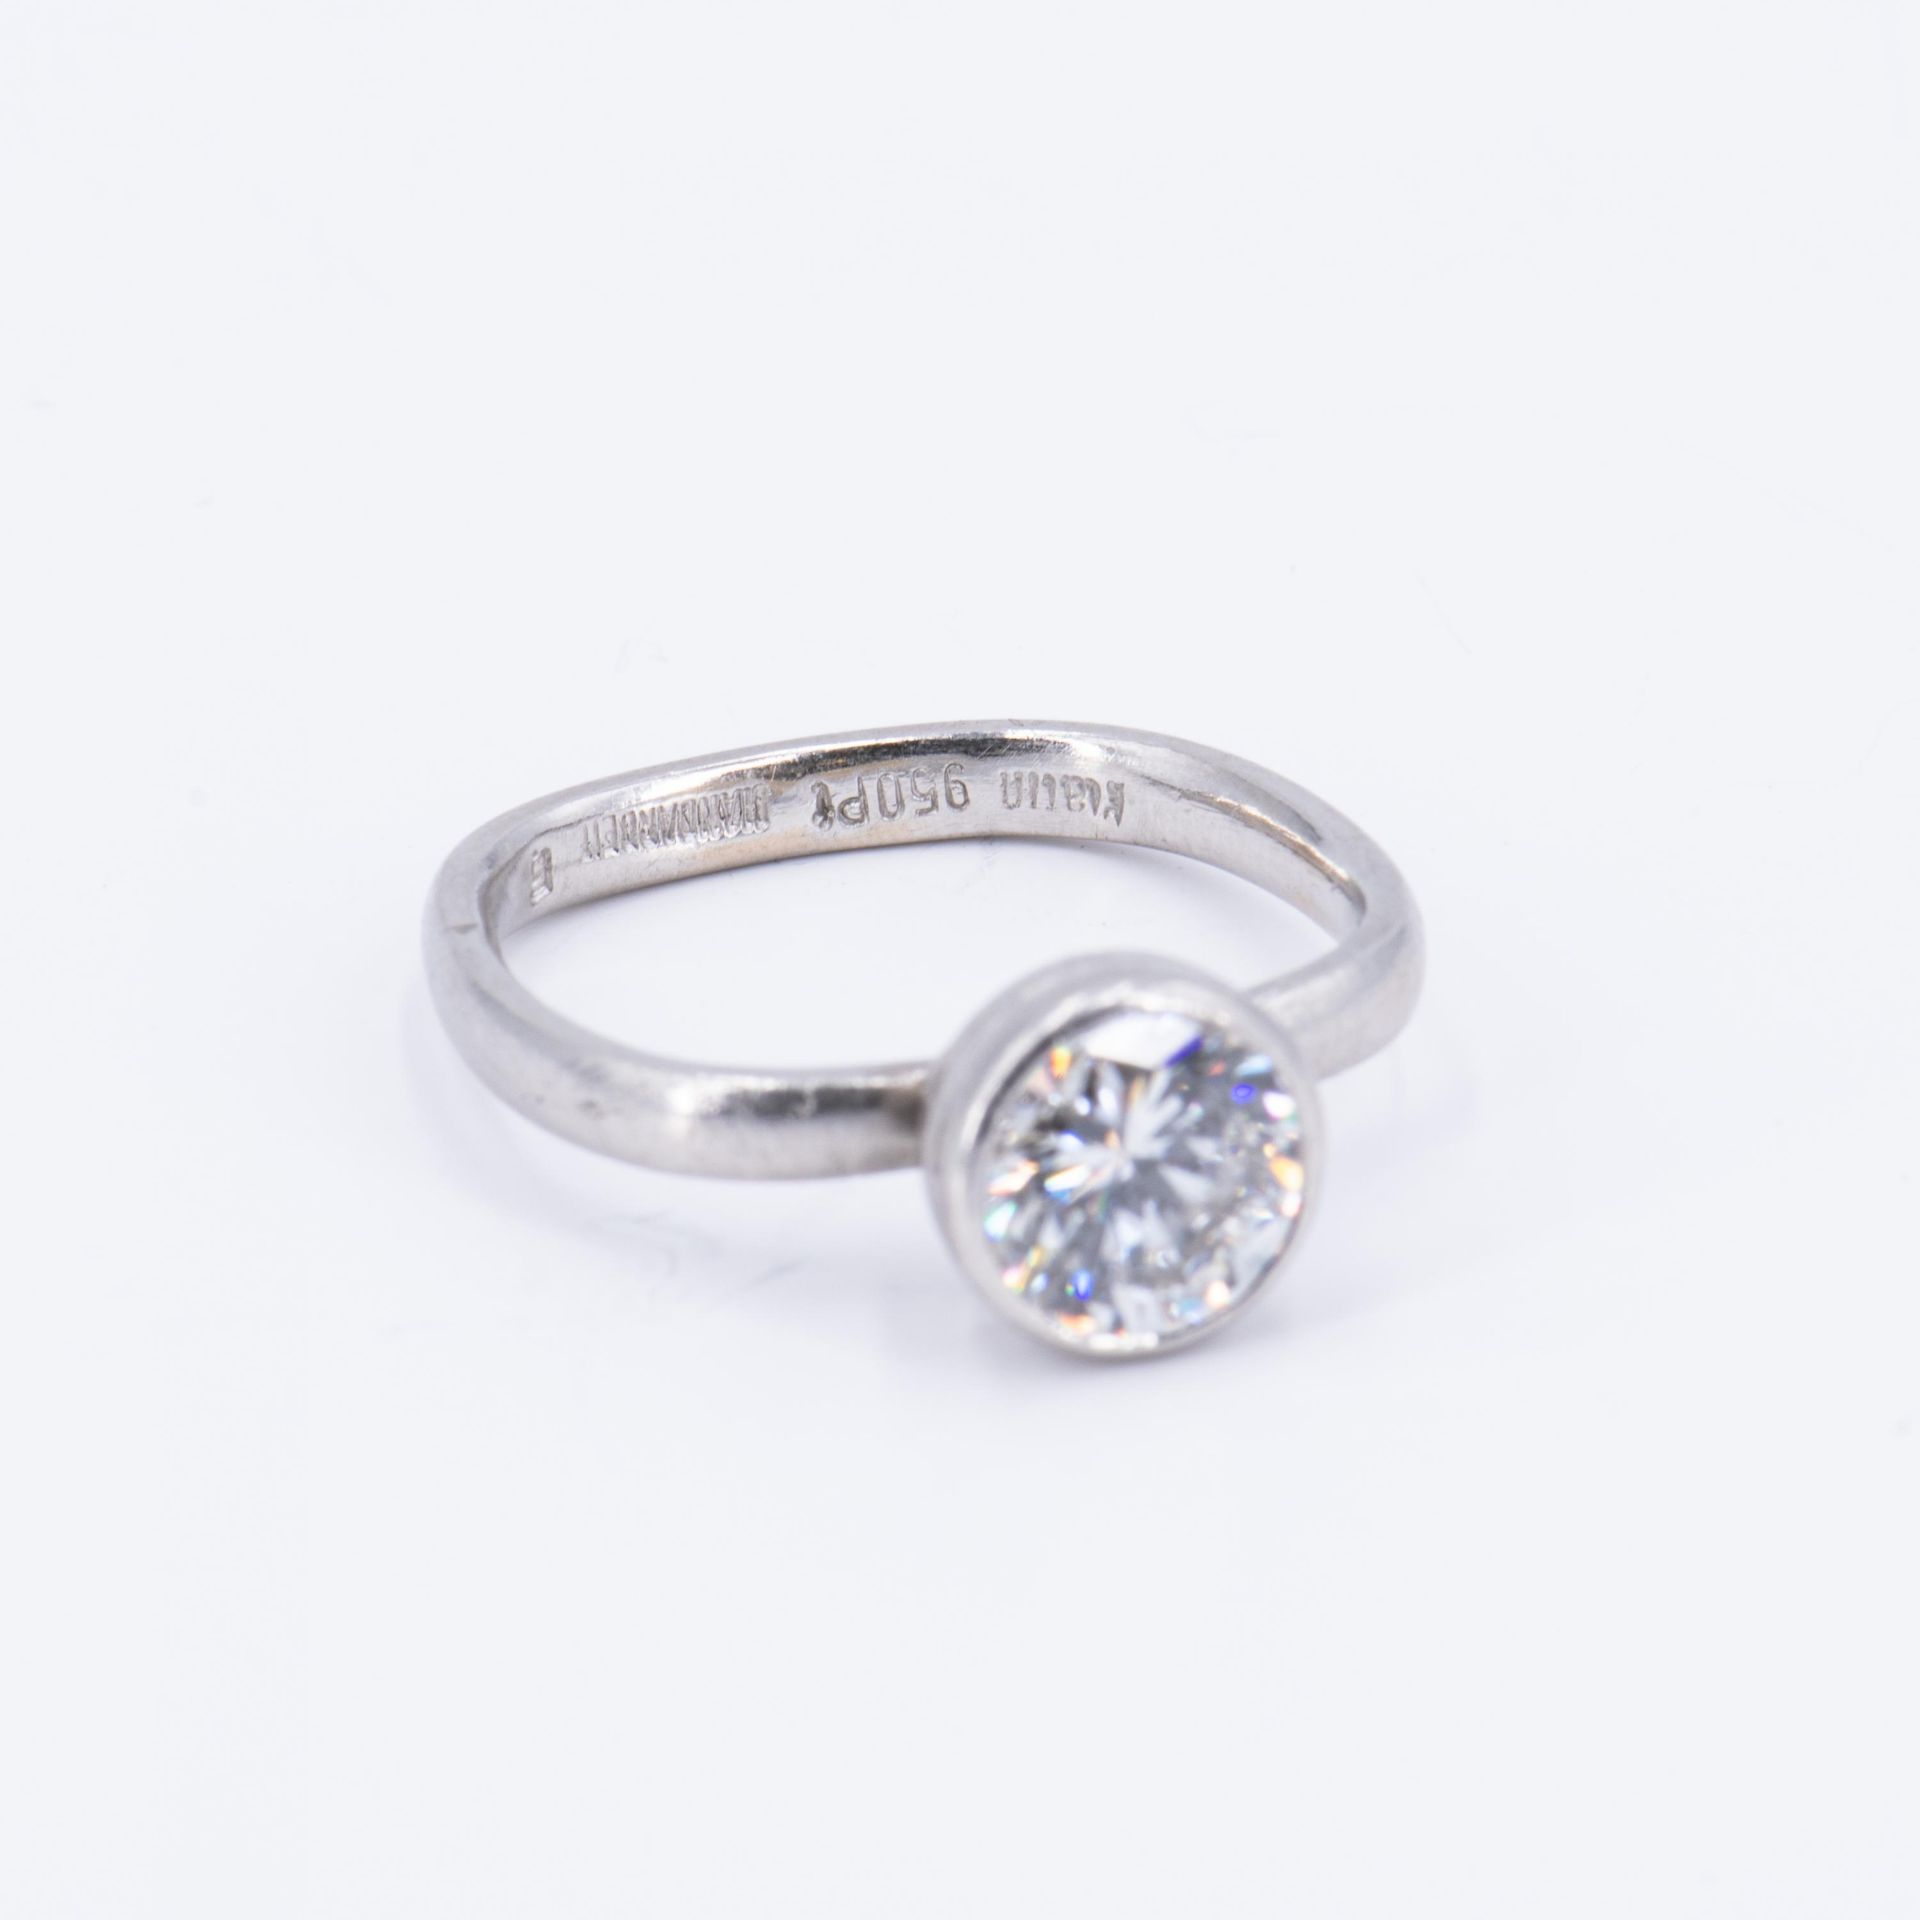 Solitaire Ring - Image 5 of 6